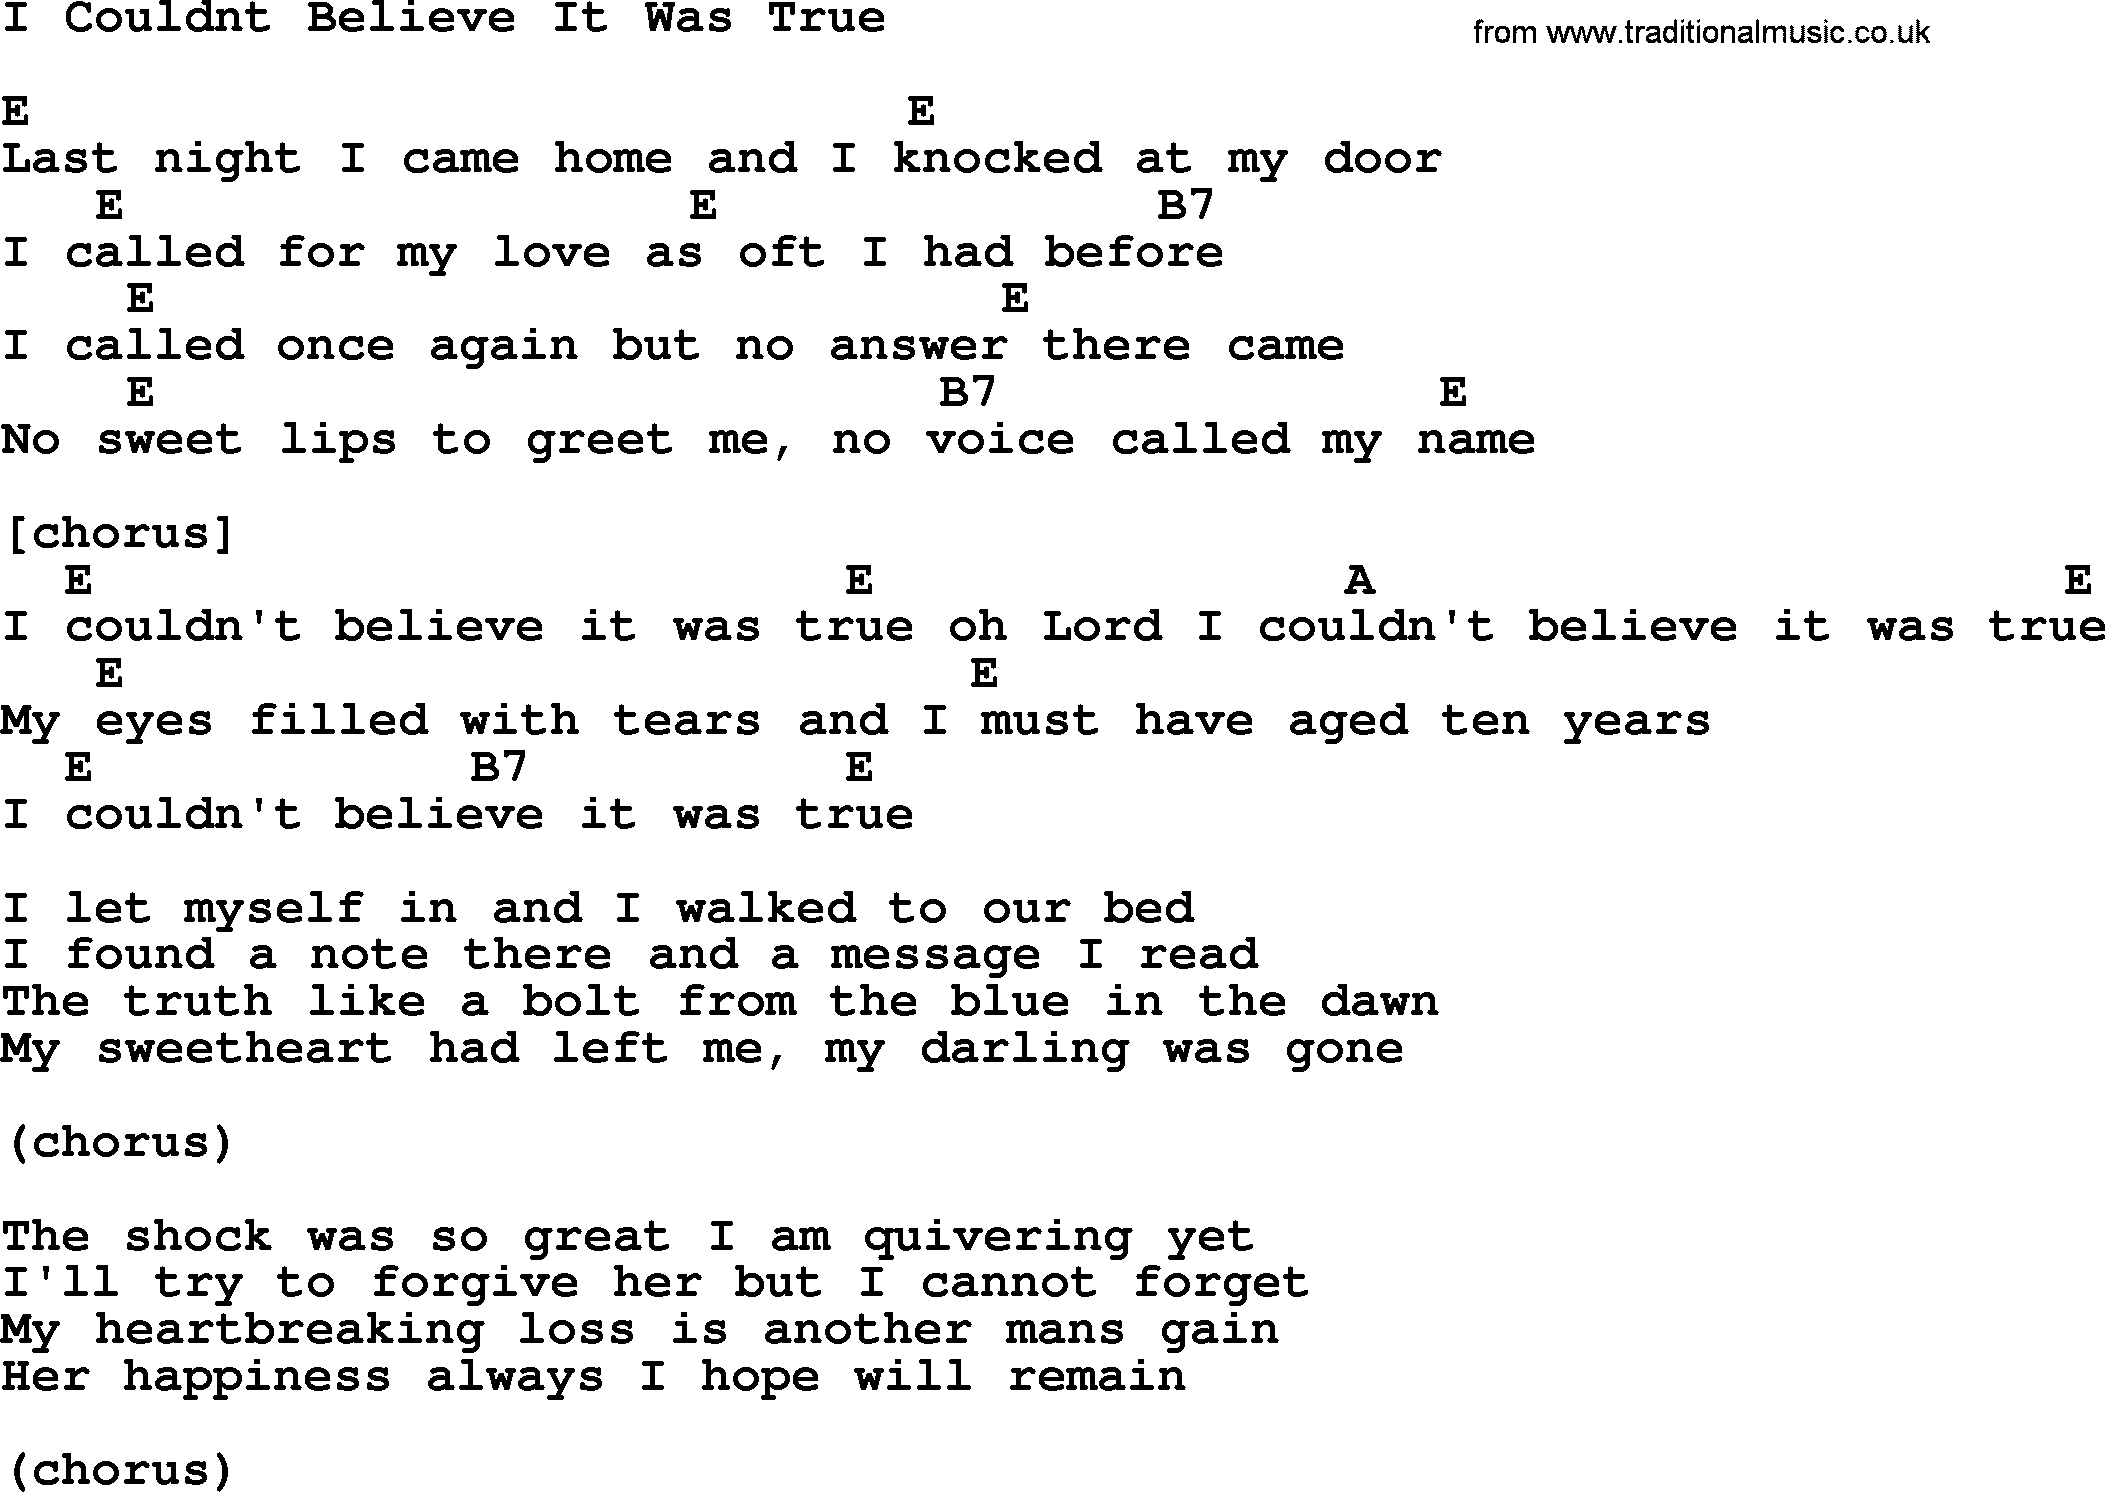 Willie Nelson song: I Couldnt Believe It Was True, lyrics and chords